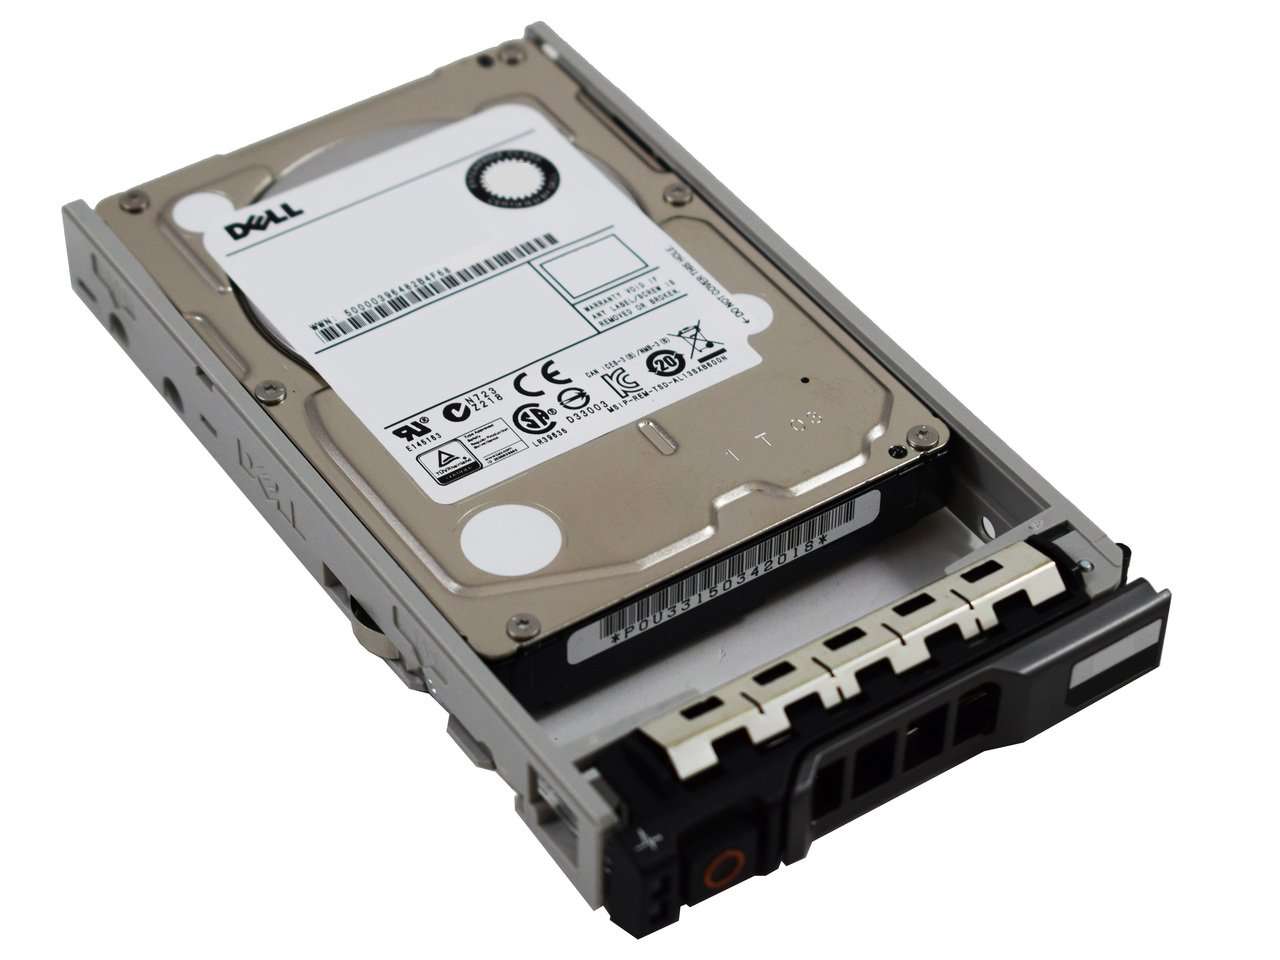 Dell G13 342-3618 600GB 10K RPM SAS 6Gb/s 512n 2.5" Manufacturer Recertified HDD